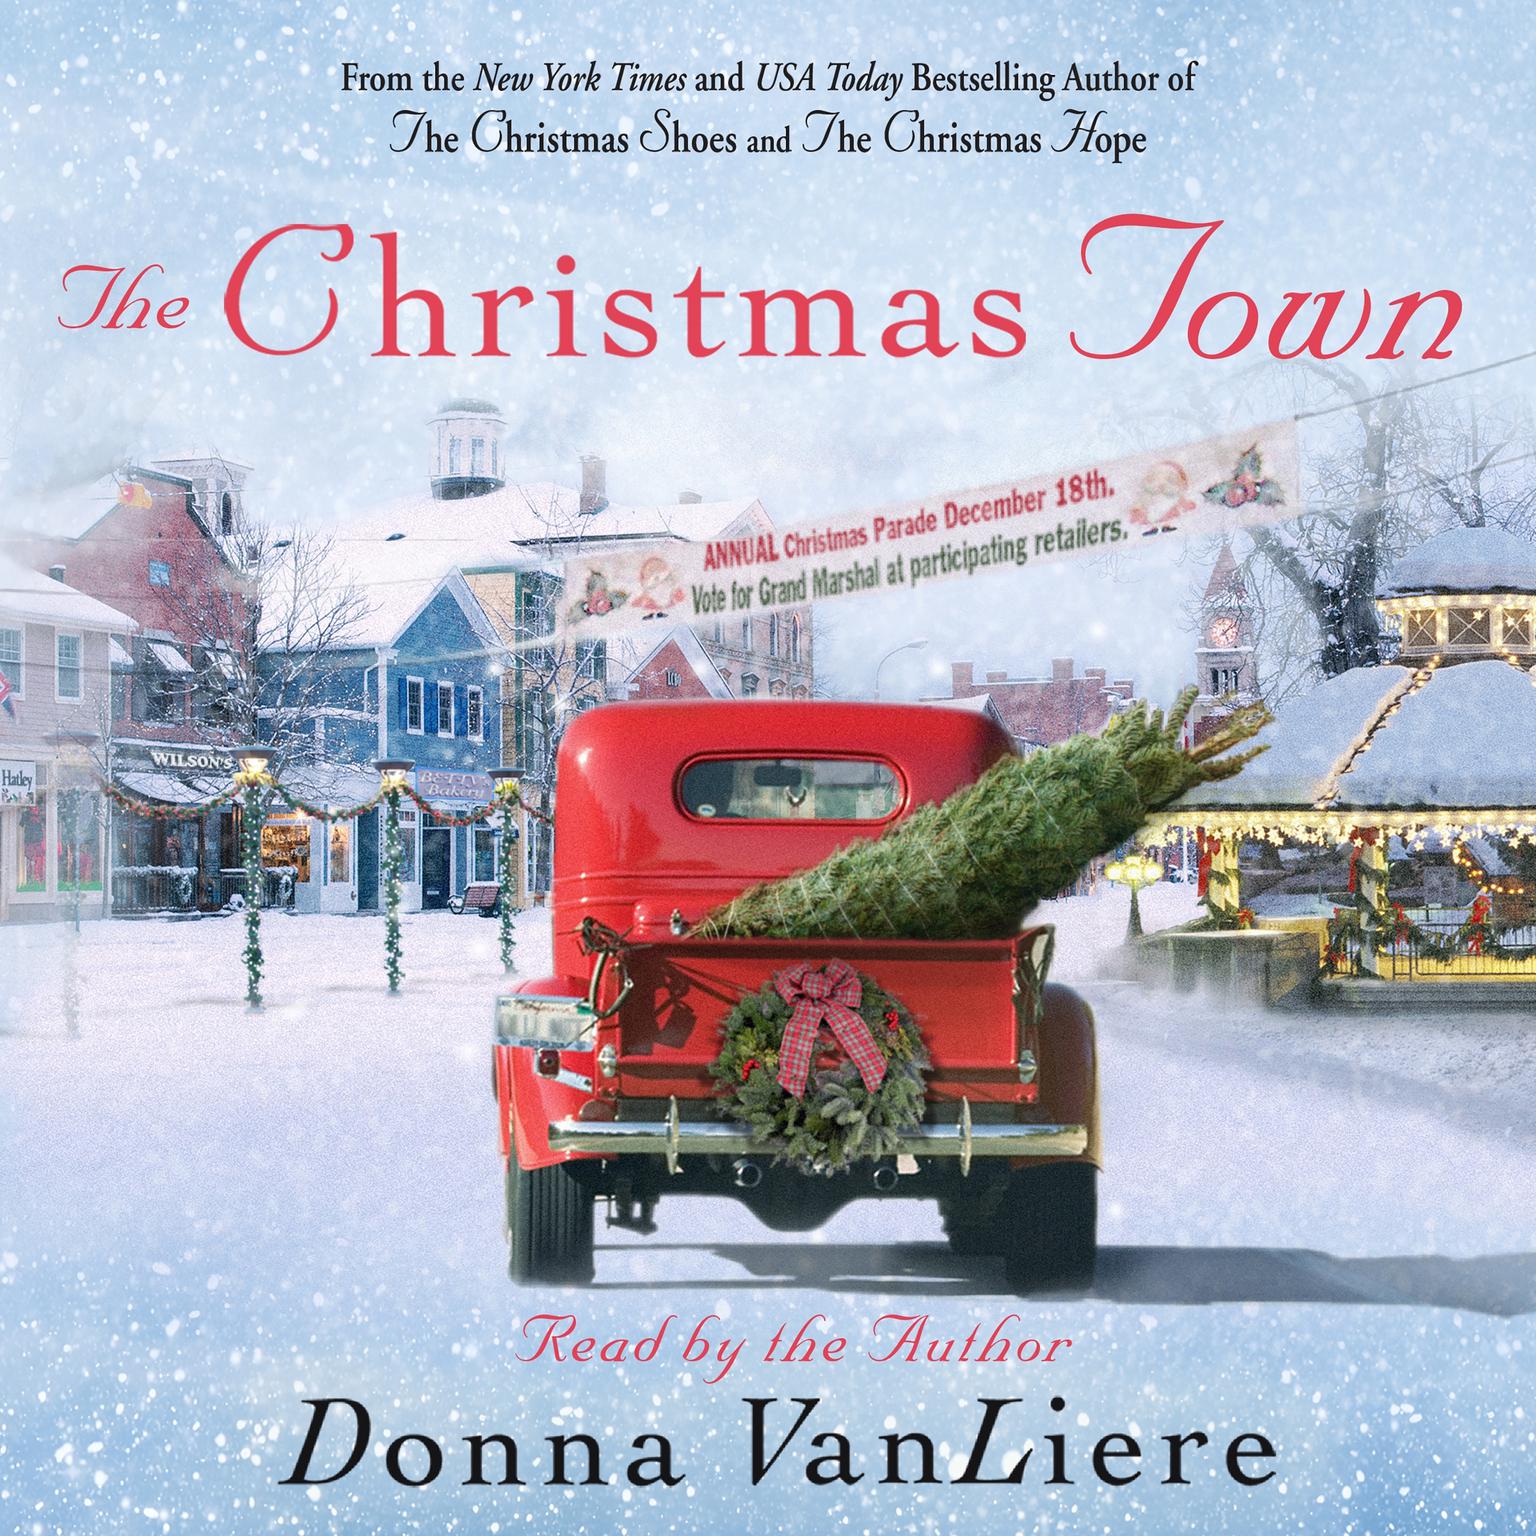 The Christmas Town: A Novel Audiobook, by Donna VanLiere